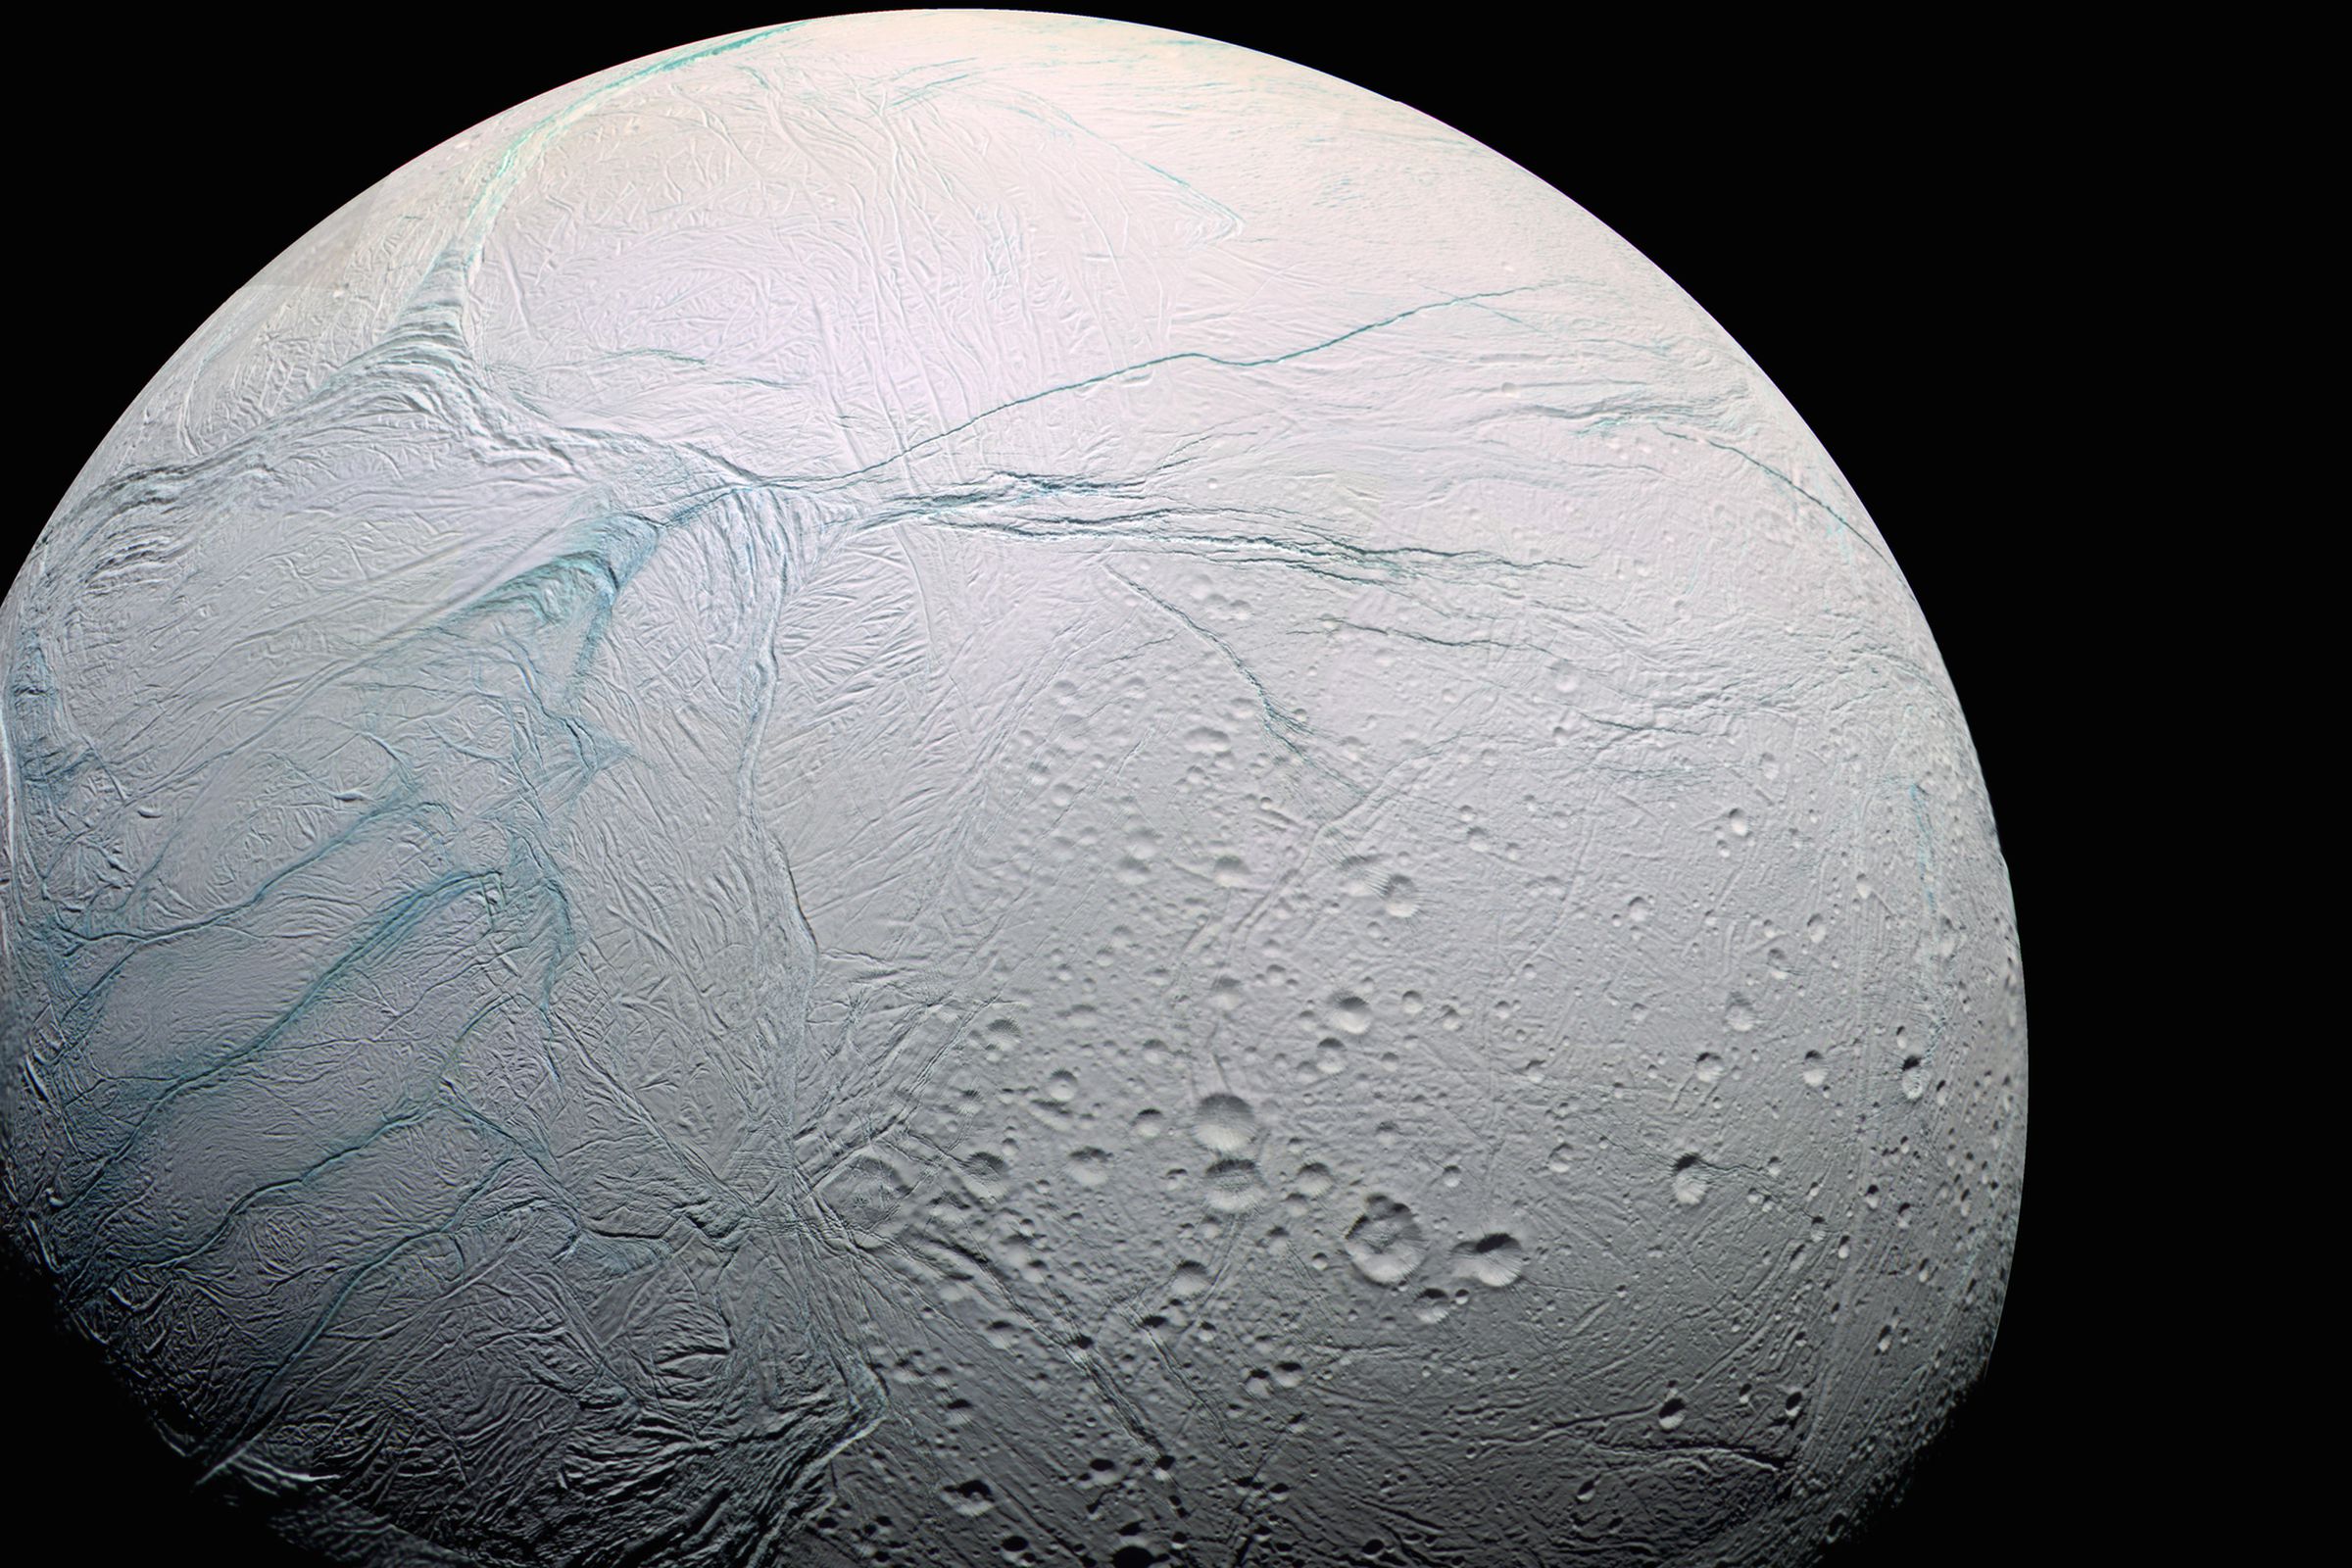 Fractures on the surface of Enceladus, a moon of Saturn, were first seen emitting water vapor in 2005.